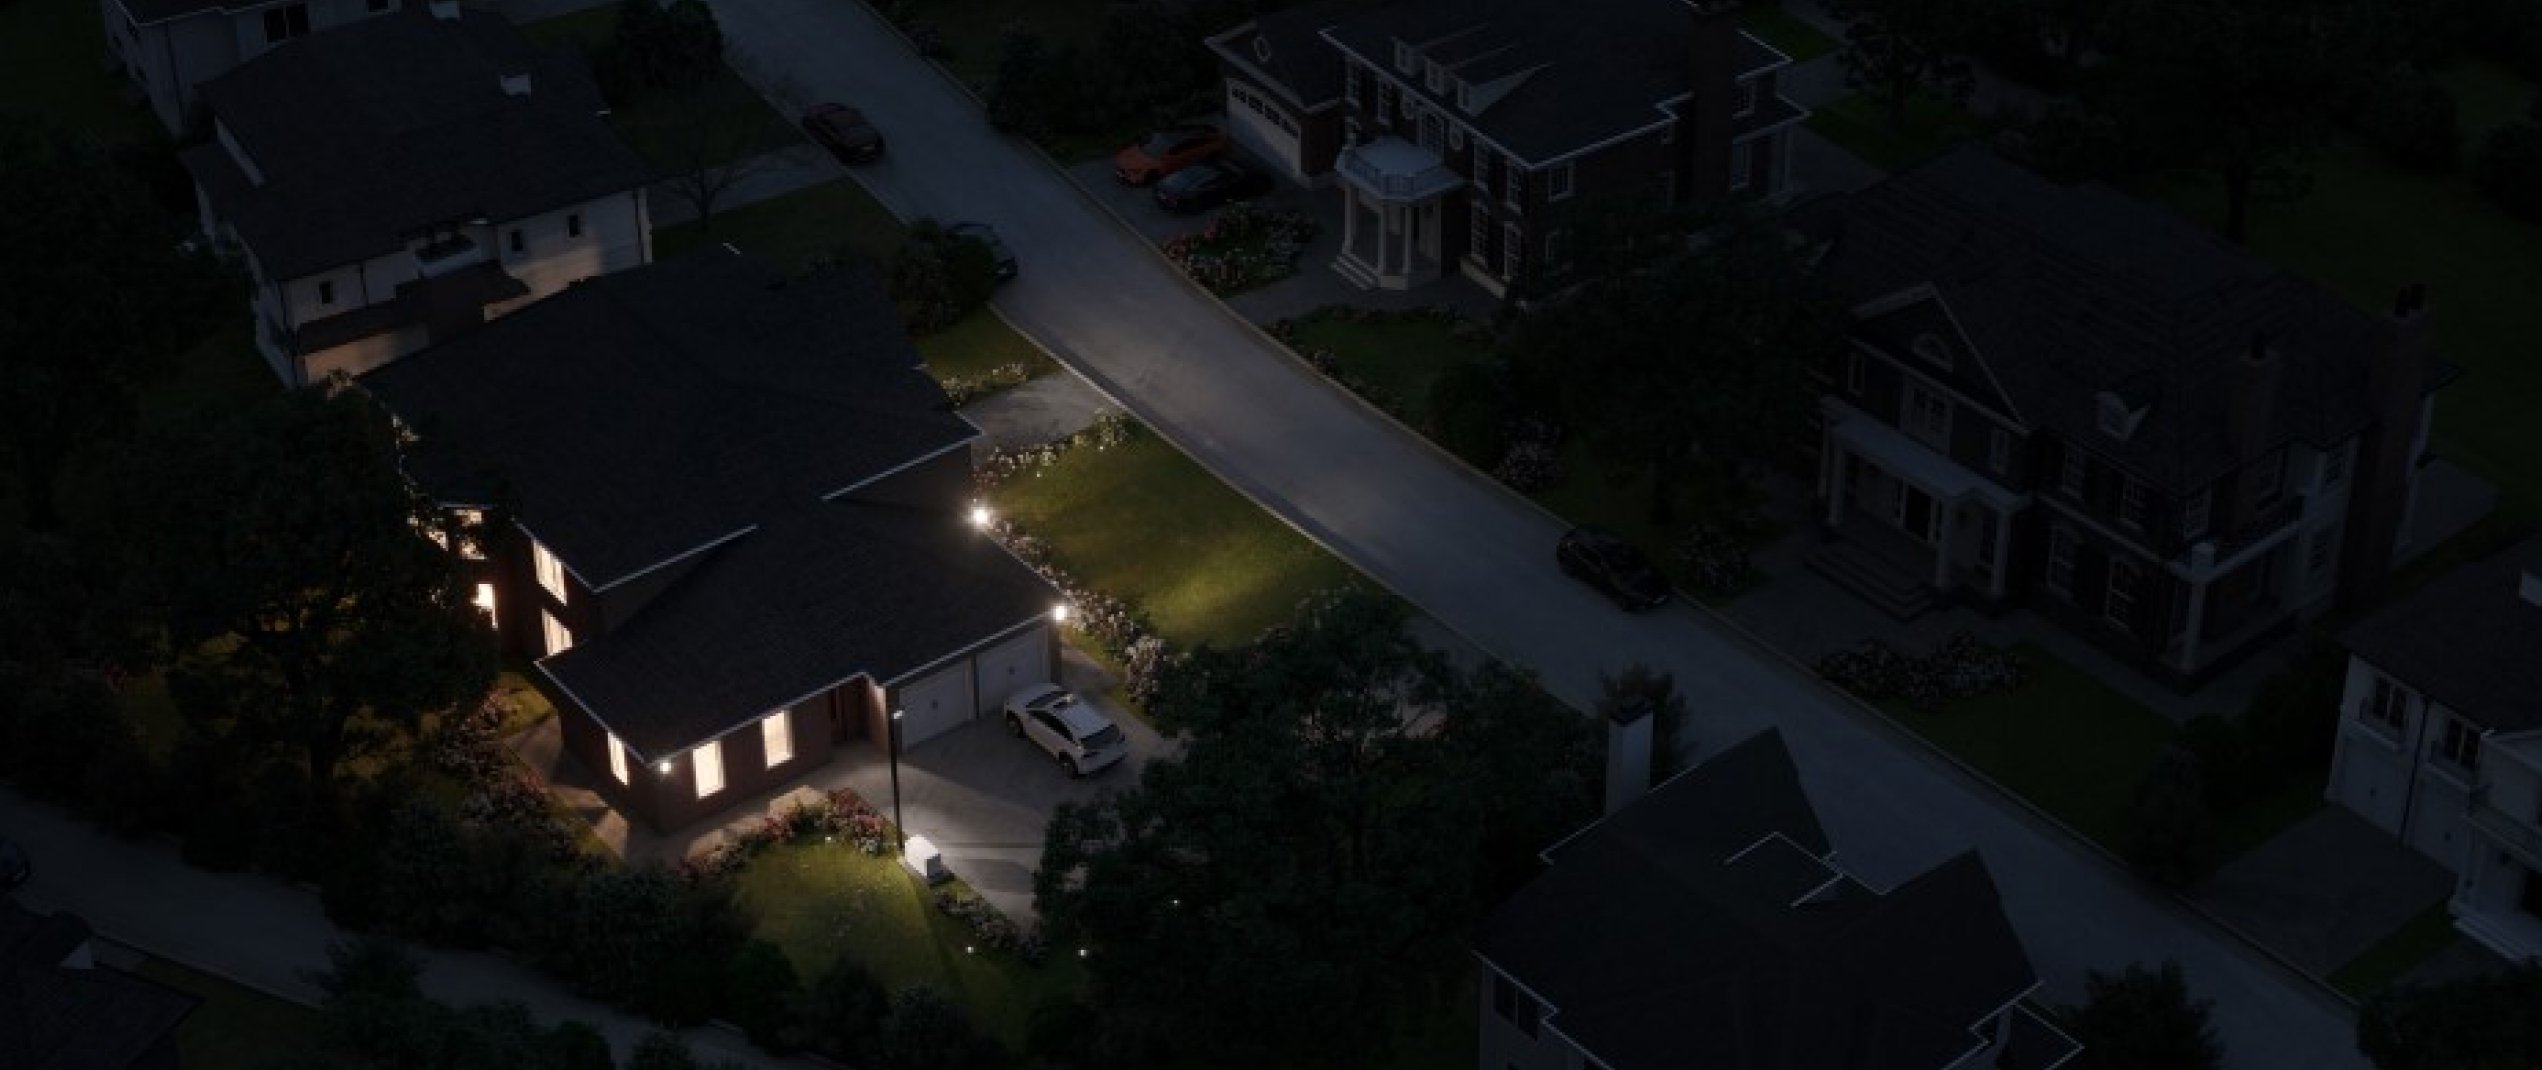 An aerial view of a house on the left with lights on at night